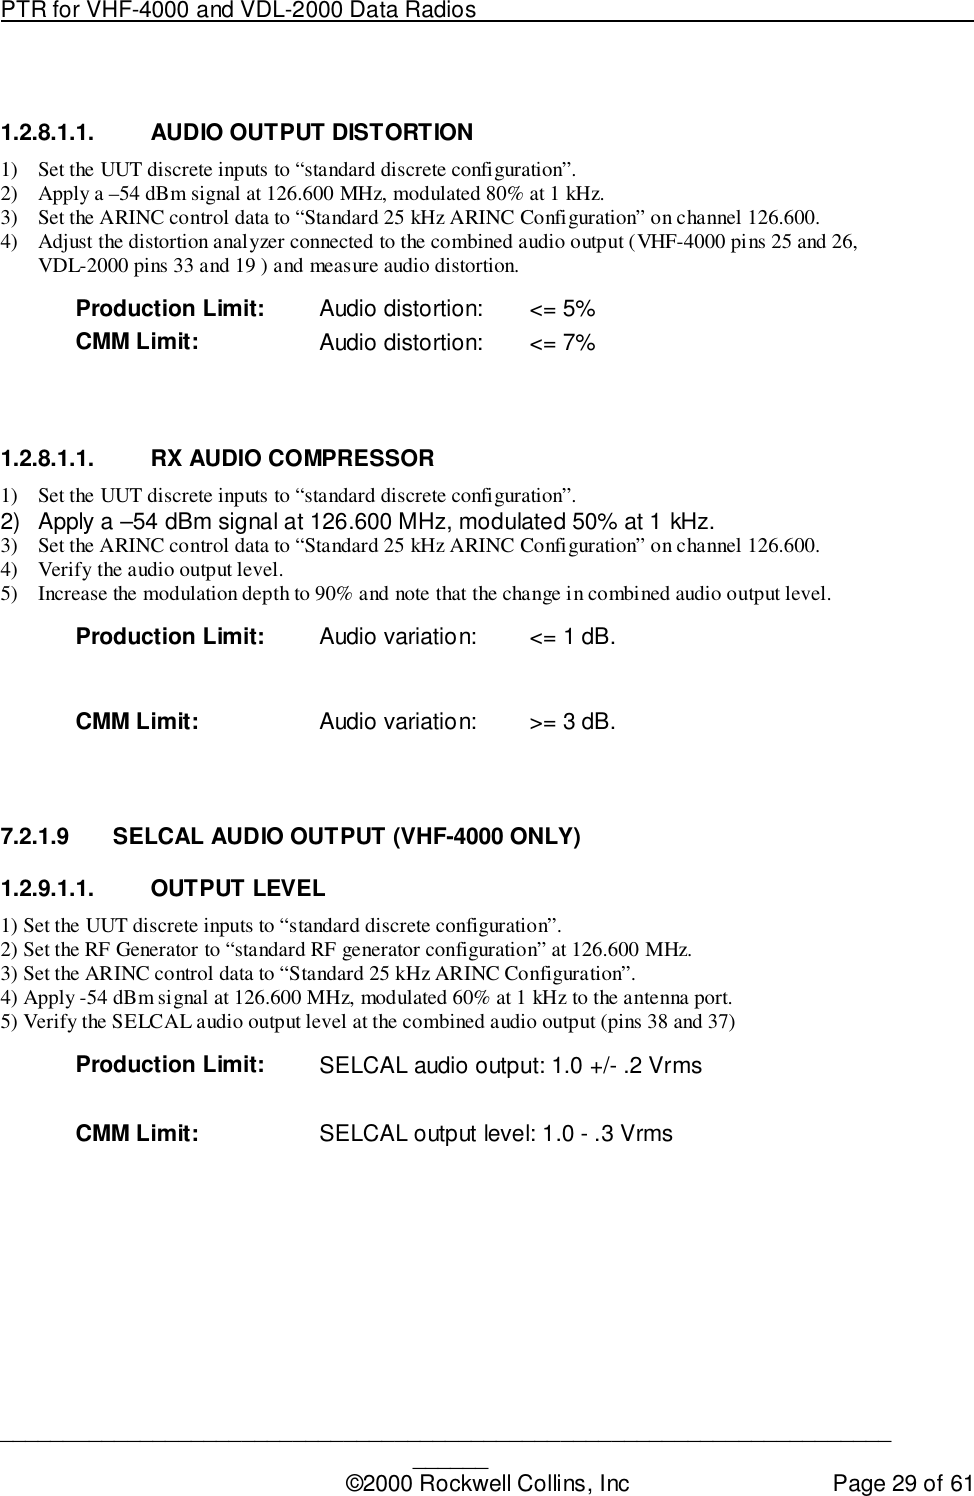 PTR for VHF-4000 and VDL-2000 Data Radios                                                                                ____________________________________________________________________________©2000 Rockwell Collins, Inc Page 29 of 611.2.8.1.1. AUDIO OUTPUT DISTORTION1) Set the UUT discrete inputs to “standard discrete configuration”.2) Apply a –54 dBm signal at 126.600 MHz, modulated 80% at 1 kHz.3) Set the ARINC control data to “Standard 25 kHz ARINC Configuration” on channel 126.600.4) Adjust the distortion analyzer connected to the combined audio output (VHF-4000 pins 25 and 26,VDL-2000 pins 33 and 19 ) and measure audio distortion.Production Limit: Audio distortion: &lt;= 5%CMM Limit: Audio distortion: &lt;= 7%1.2.8.1.1.  RX AUDIO COMPRESSOR1) Set the UUT discrete inputs to “standard discrete configuration”.2)  Apply a –54 dBm signal at 126.600 MHz, modulated 50% at 1 kHz.3) Set the ARINC control data to “Standard 25 kHz ARINC Configuration” on channel 126.600.4) Verify the audio output level.5) Increase the modulation depth to 90% and note that the change in combined audio output level.Production Limit: Audio variation: &lt;= 1 dB.CMM Limit: Audio variation: &gt;= 3 dB.7.2.1.9  SELCAL AUDIO OUTPUT (VHF-4000 ONLY)1.2.9.1.1. OUTPUT LEVEL1) Set the UUT discrete inputs to “standard discrete configuration”.2) Set the RF Generator to “standard RF generator configuration” at 126.600 MHz.3) Set the ARINC control data to “Standard 25 kHz ARINC Configuration”.4) Apply -54 dBm signal at 126.600 MHz, modulated 60% at 1 kHz to the antenna port.5) Verify the SELCAL audio output level at the combined audio output (pins 38 and 37)Production Limit: SELCAL audio output: 1.0 +/- .2 VrmsCMM Limit: SELCAL output level: 1.0 - .3 Vrms